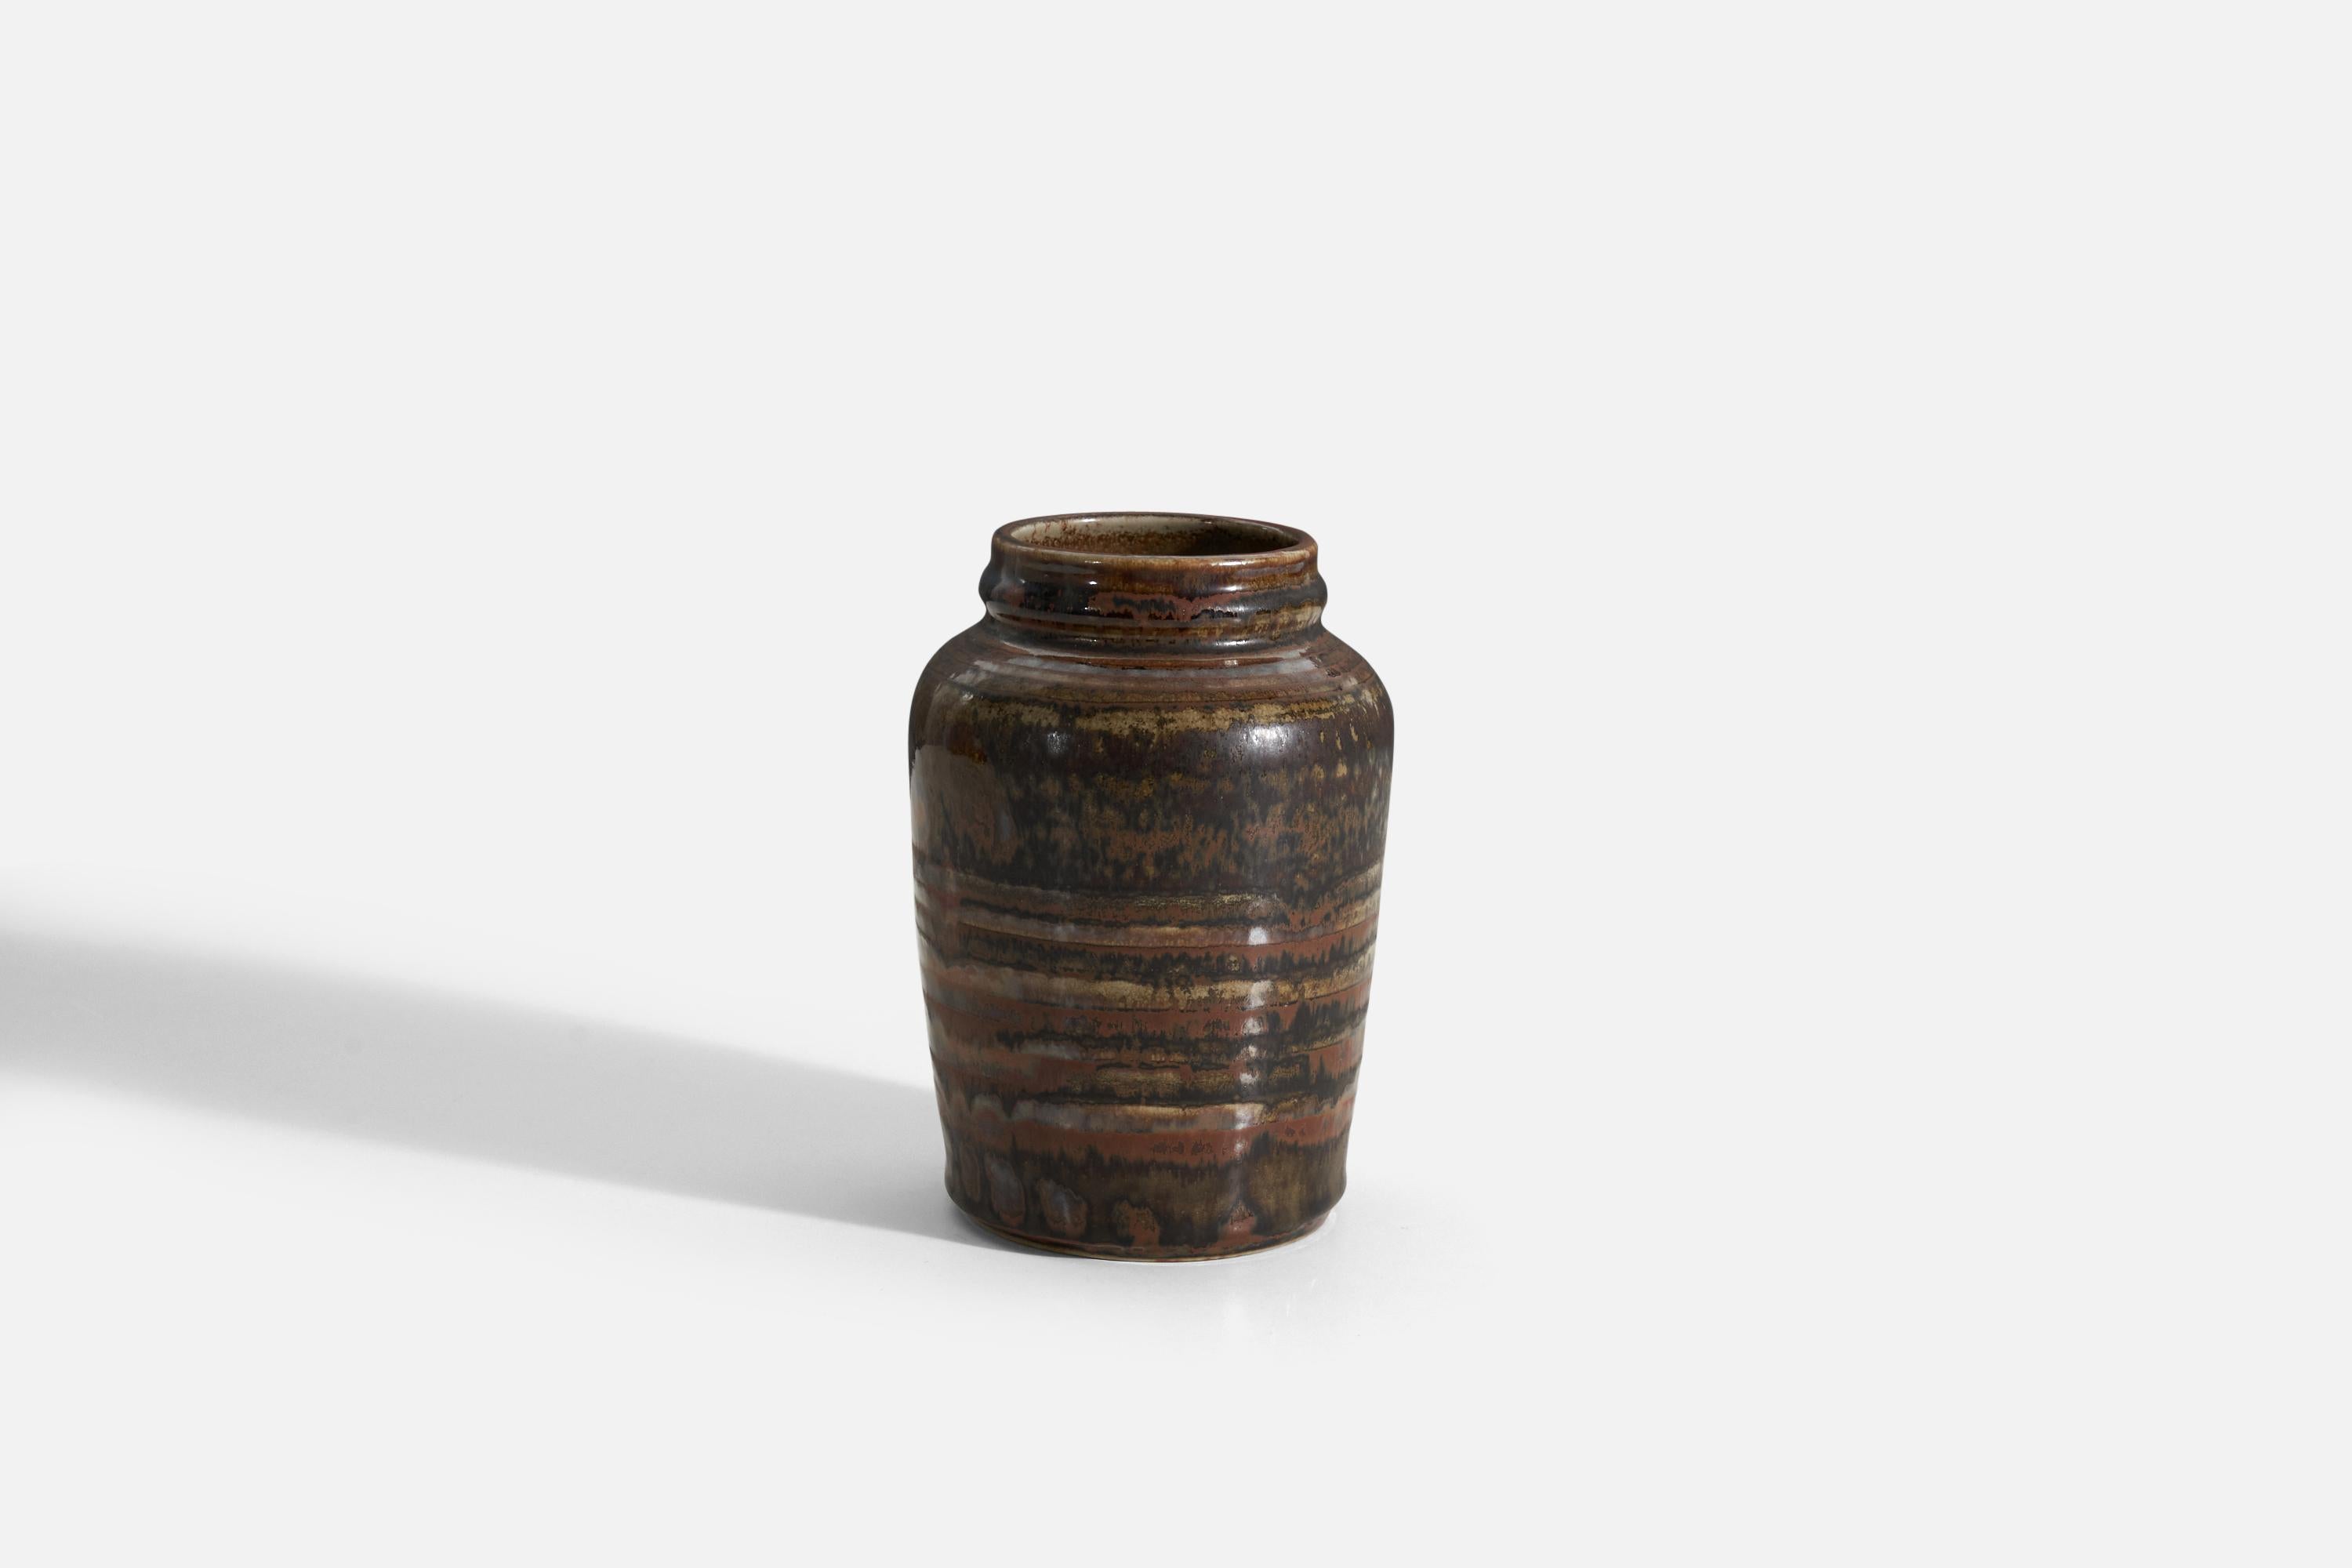 A brown glazed stoneware vase designed by Carl-Harry Stålhane and Produced by Rörstrand, Sweden, 1960s.